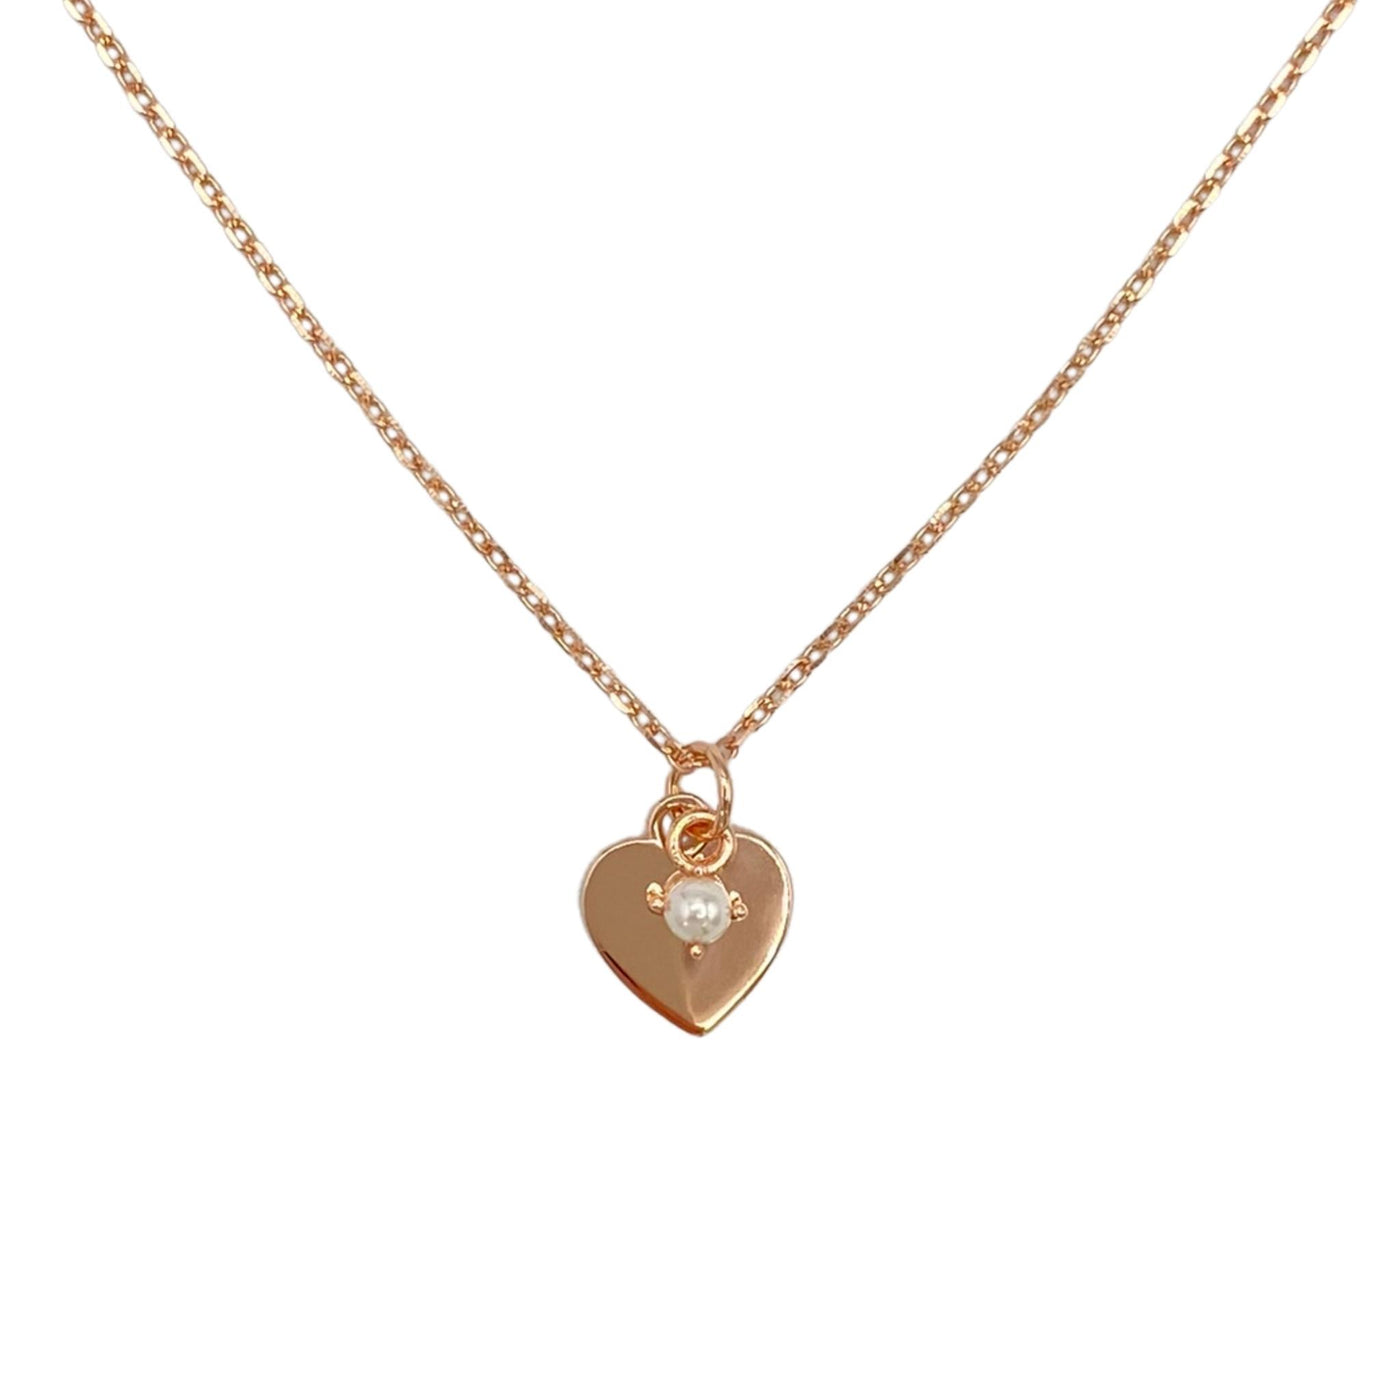 Silver necklace with heart and pearl charms